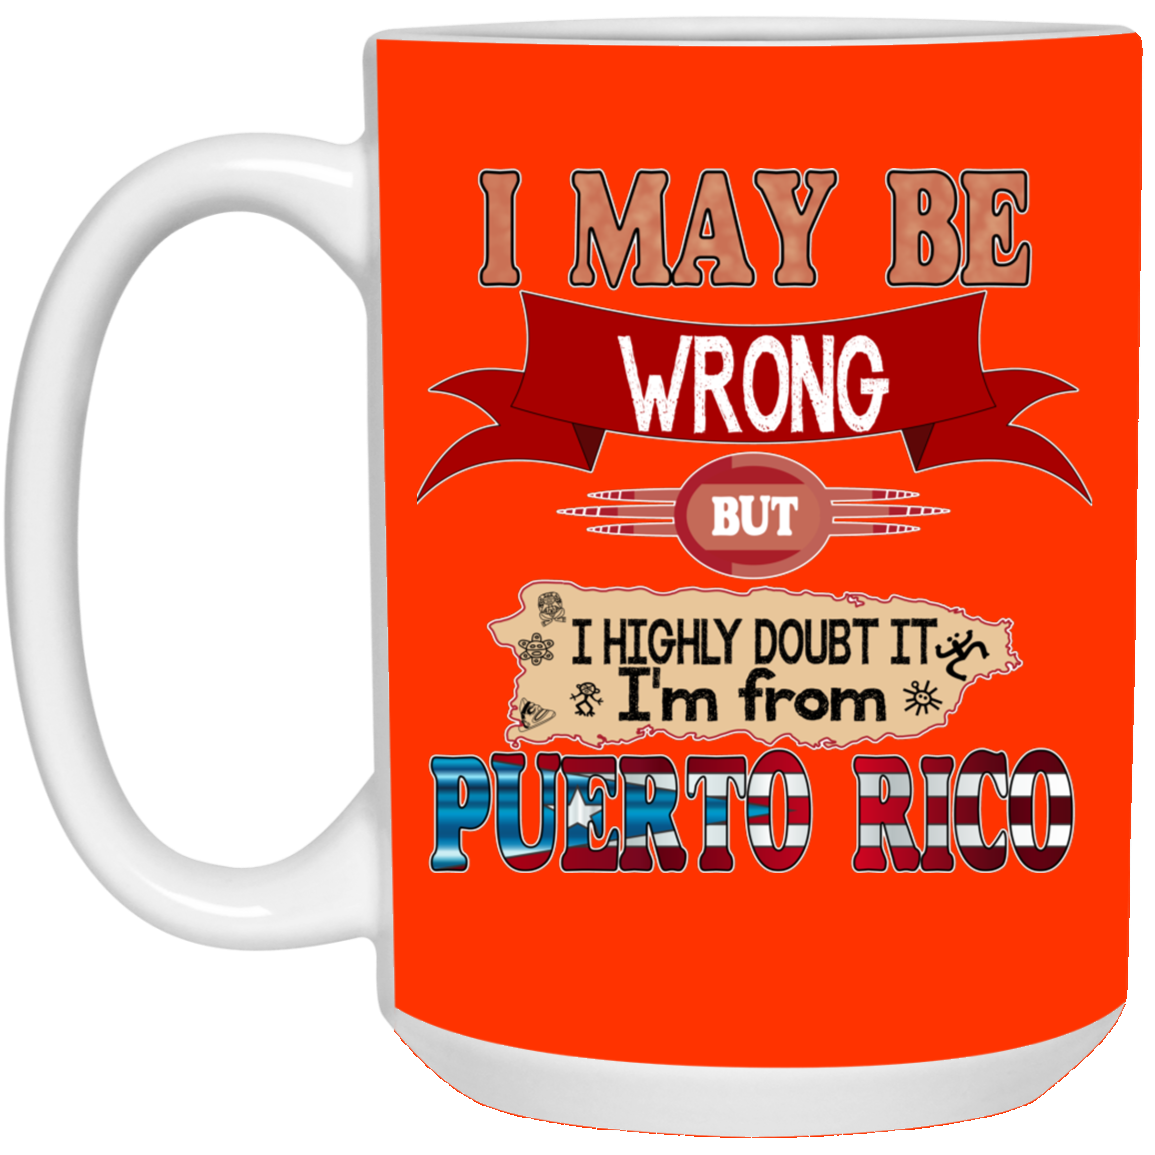 My Be Wrong But Doubt It - 15 oz. White Mug - Puerto Rican Pride